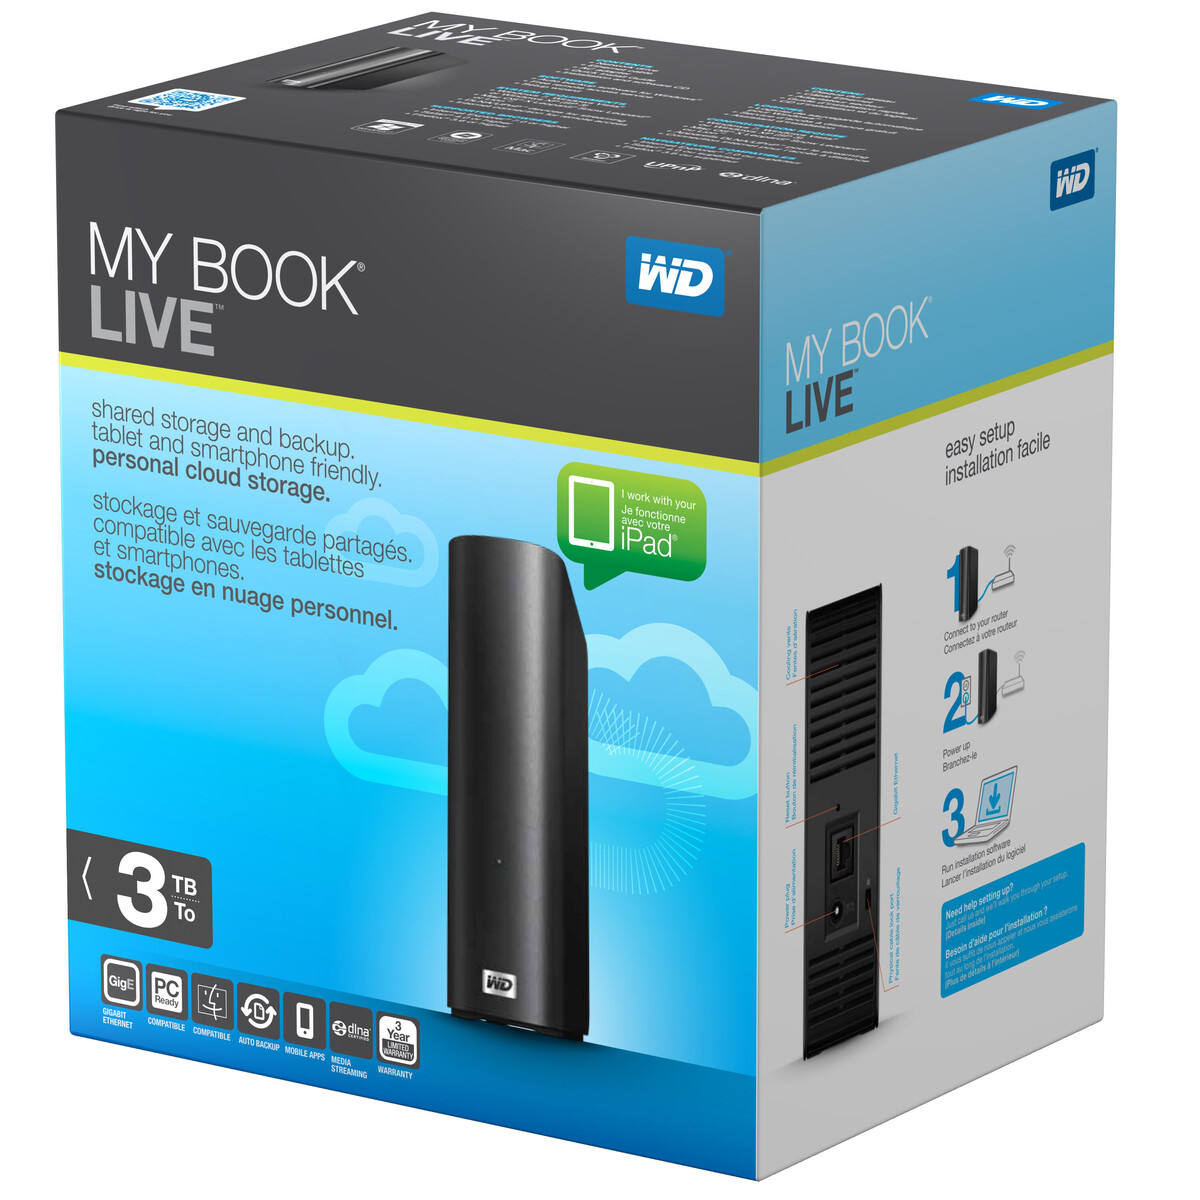 Western Digital: Disconnect WD My Book Live External HDDs From the 